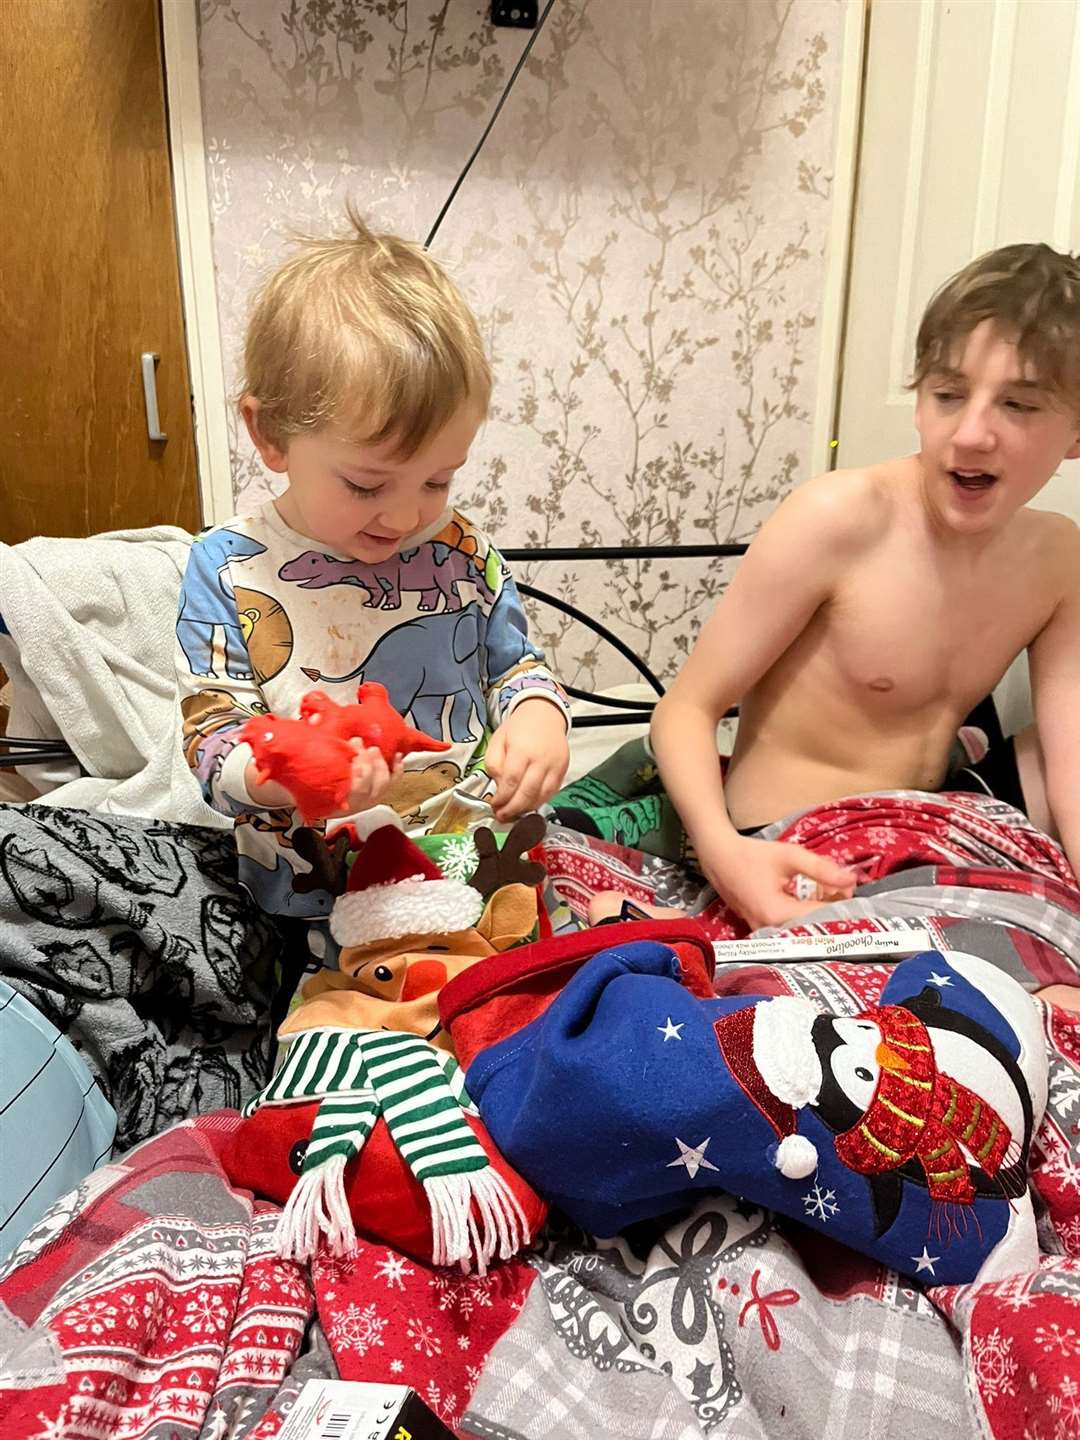 Daisy and Eoin's two other sons opening gifts from Santa on Christmas Day.